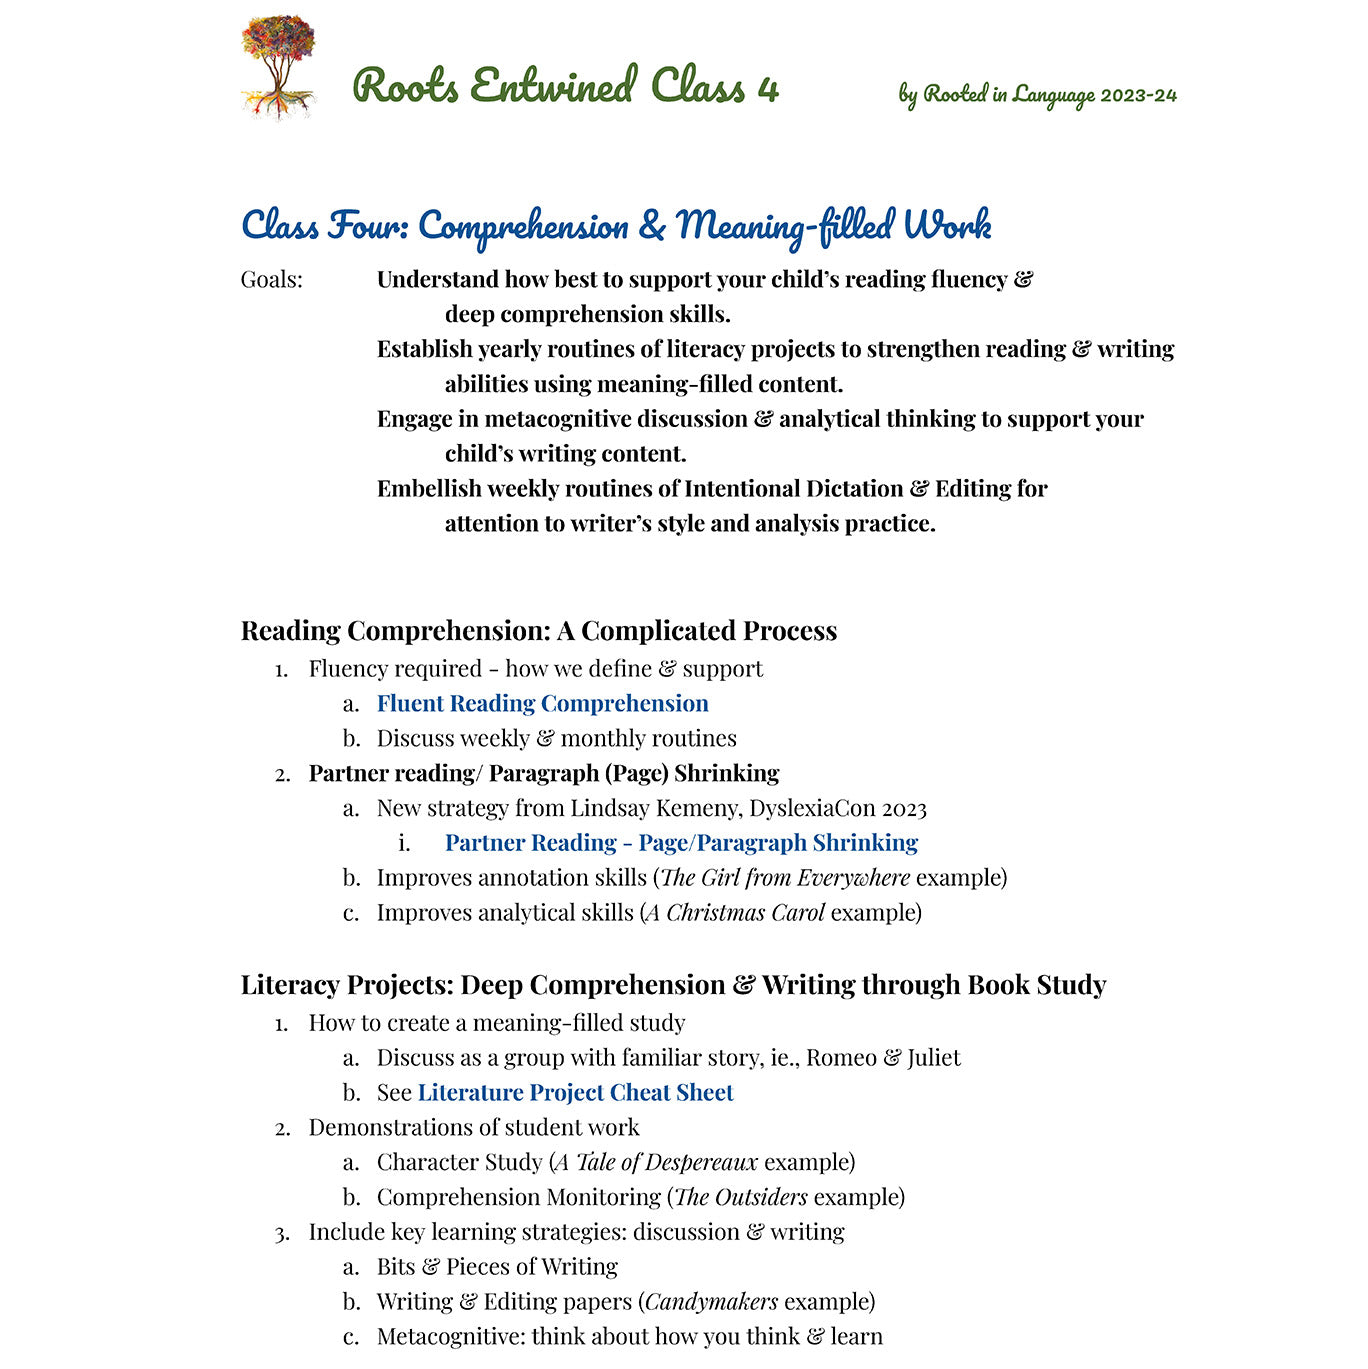 Roots Entwined Educator Course